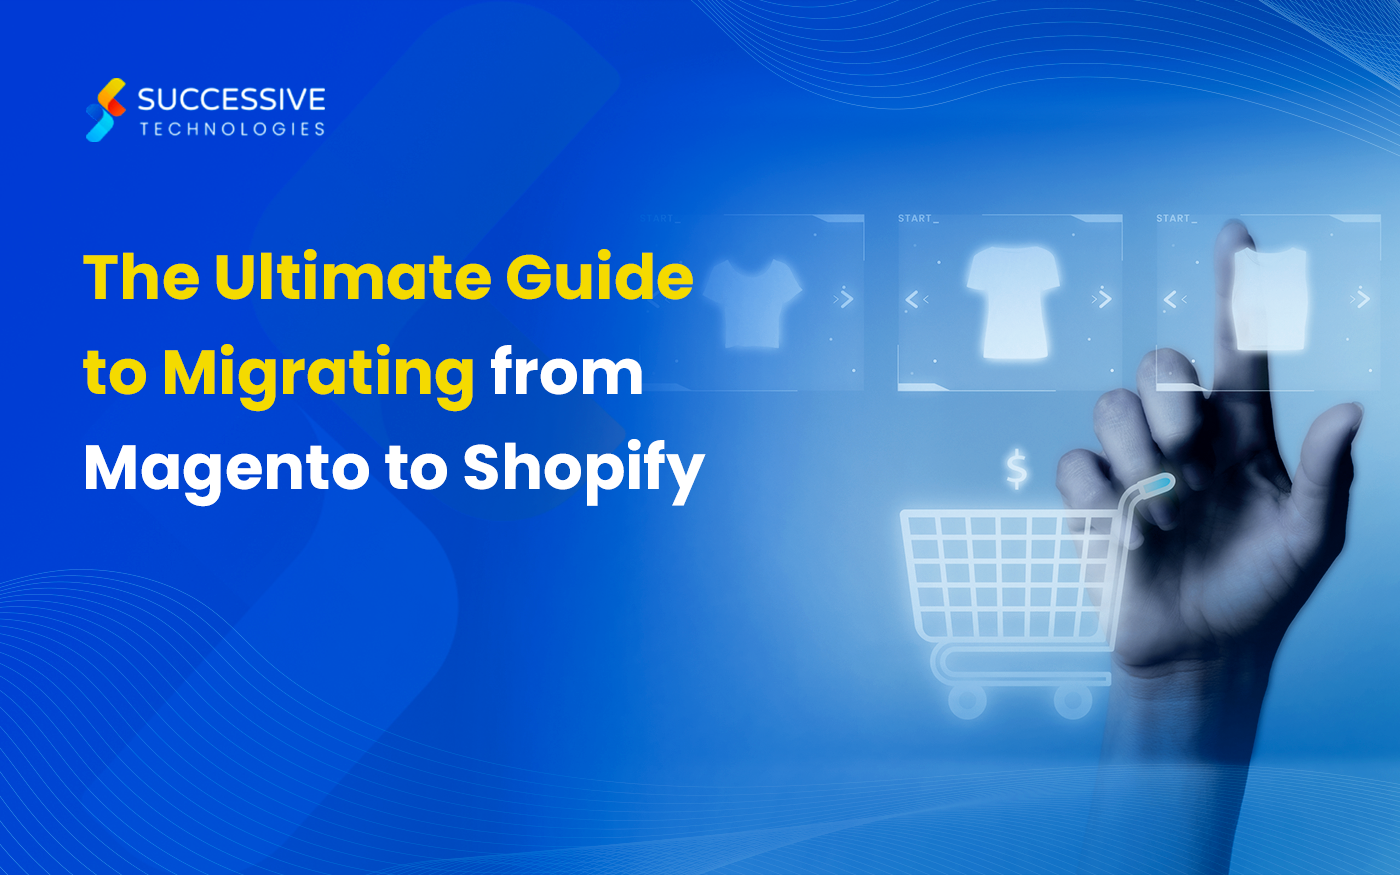 The Ultimate Guide to Magento to Shopify Migration